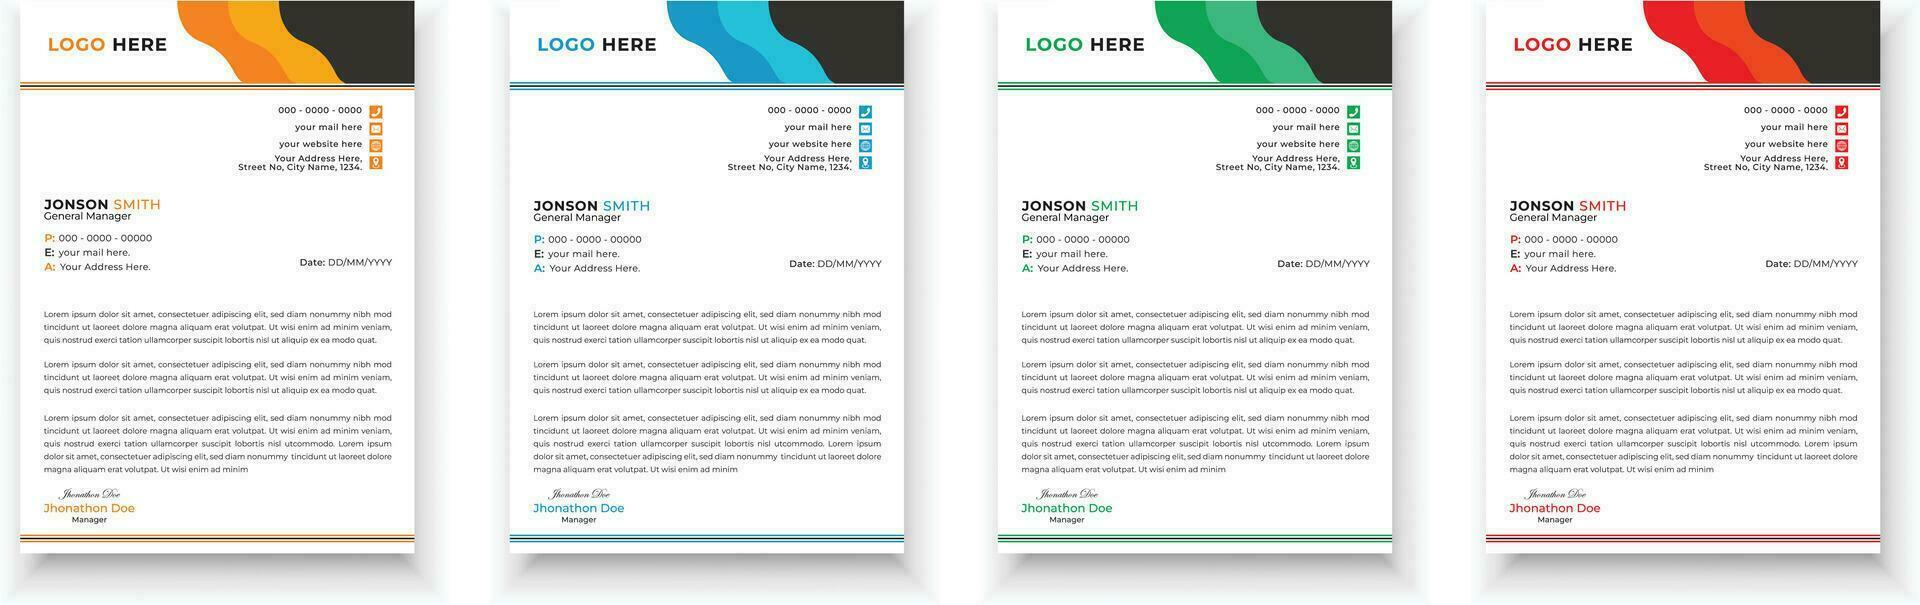 Letterhead design bundle. Clean and professional corporate business letterhead design template with with 4 colors. Creative elegant and minimalist style letterhead design for your business. vector